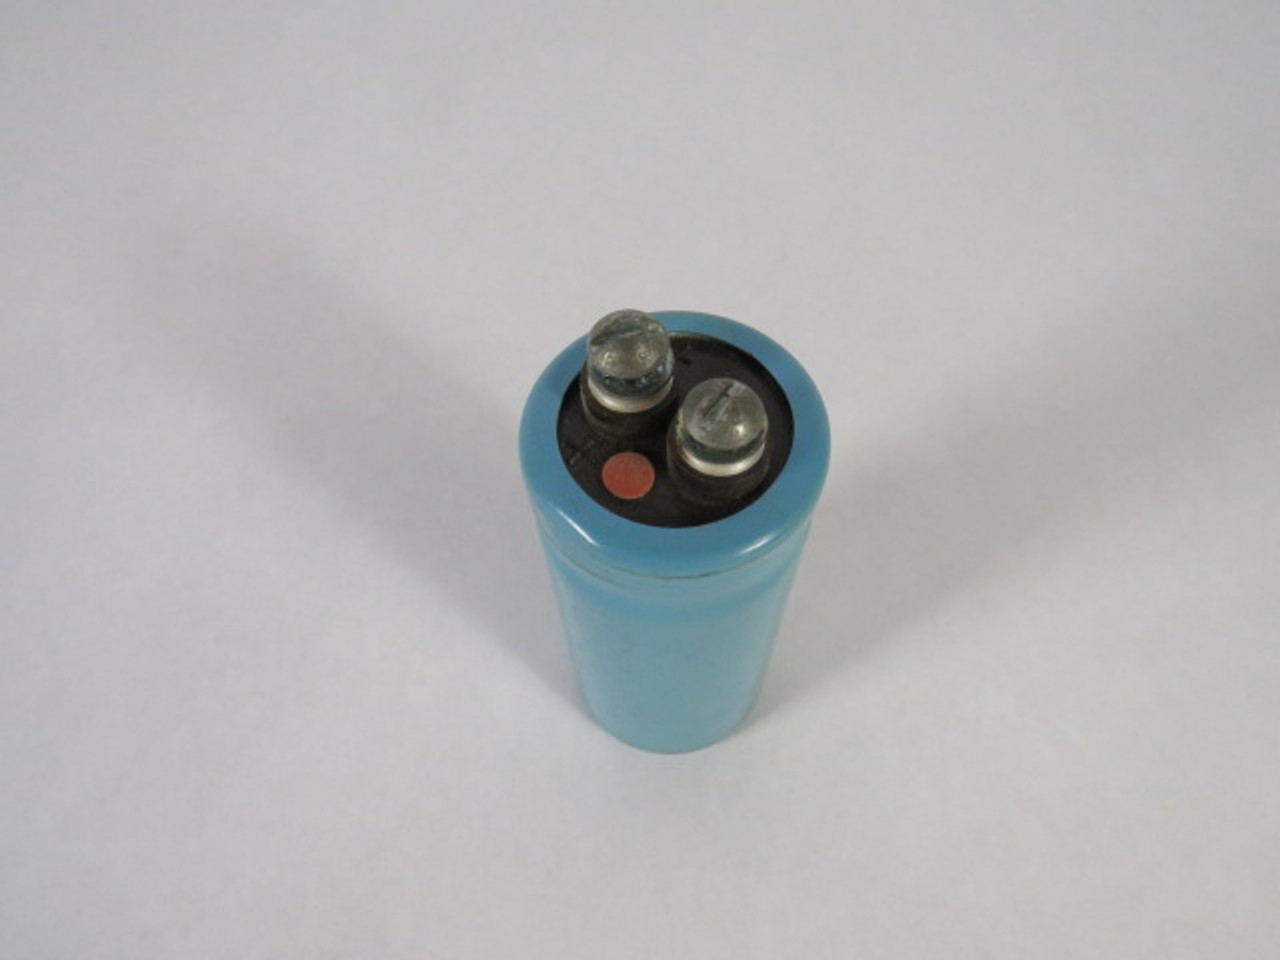 CDE FAS6800-50-AB Capacitor 6800uF 50VDC Type DCM USED